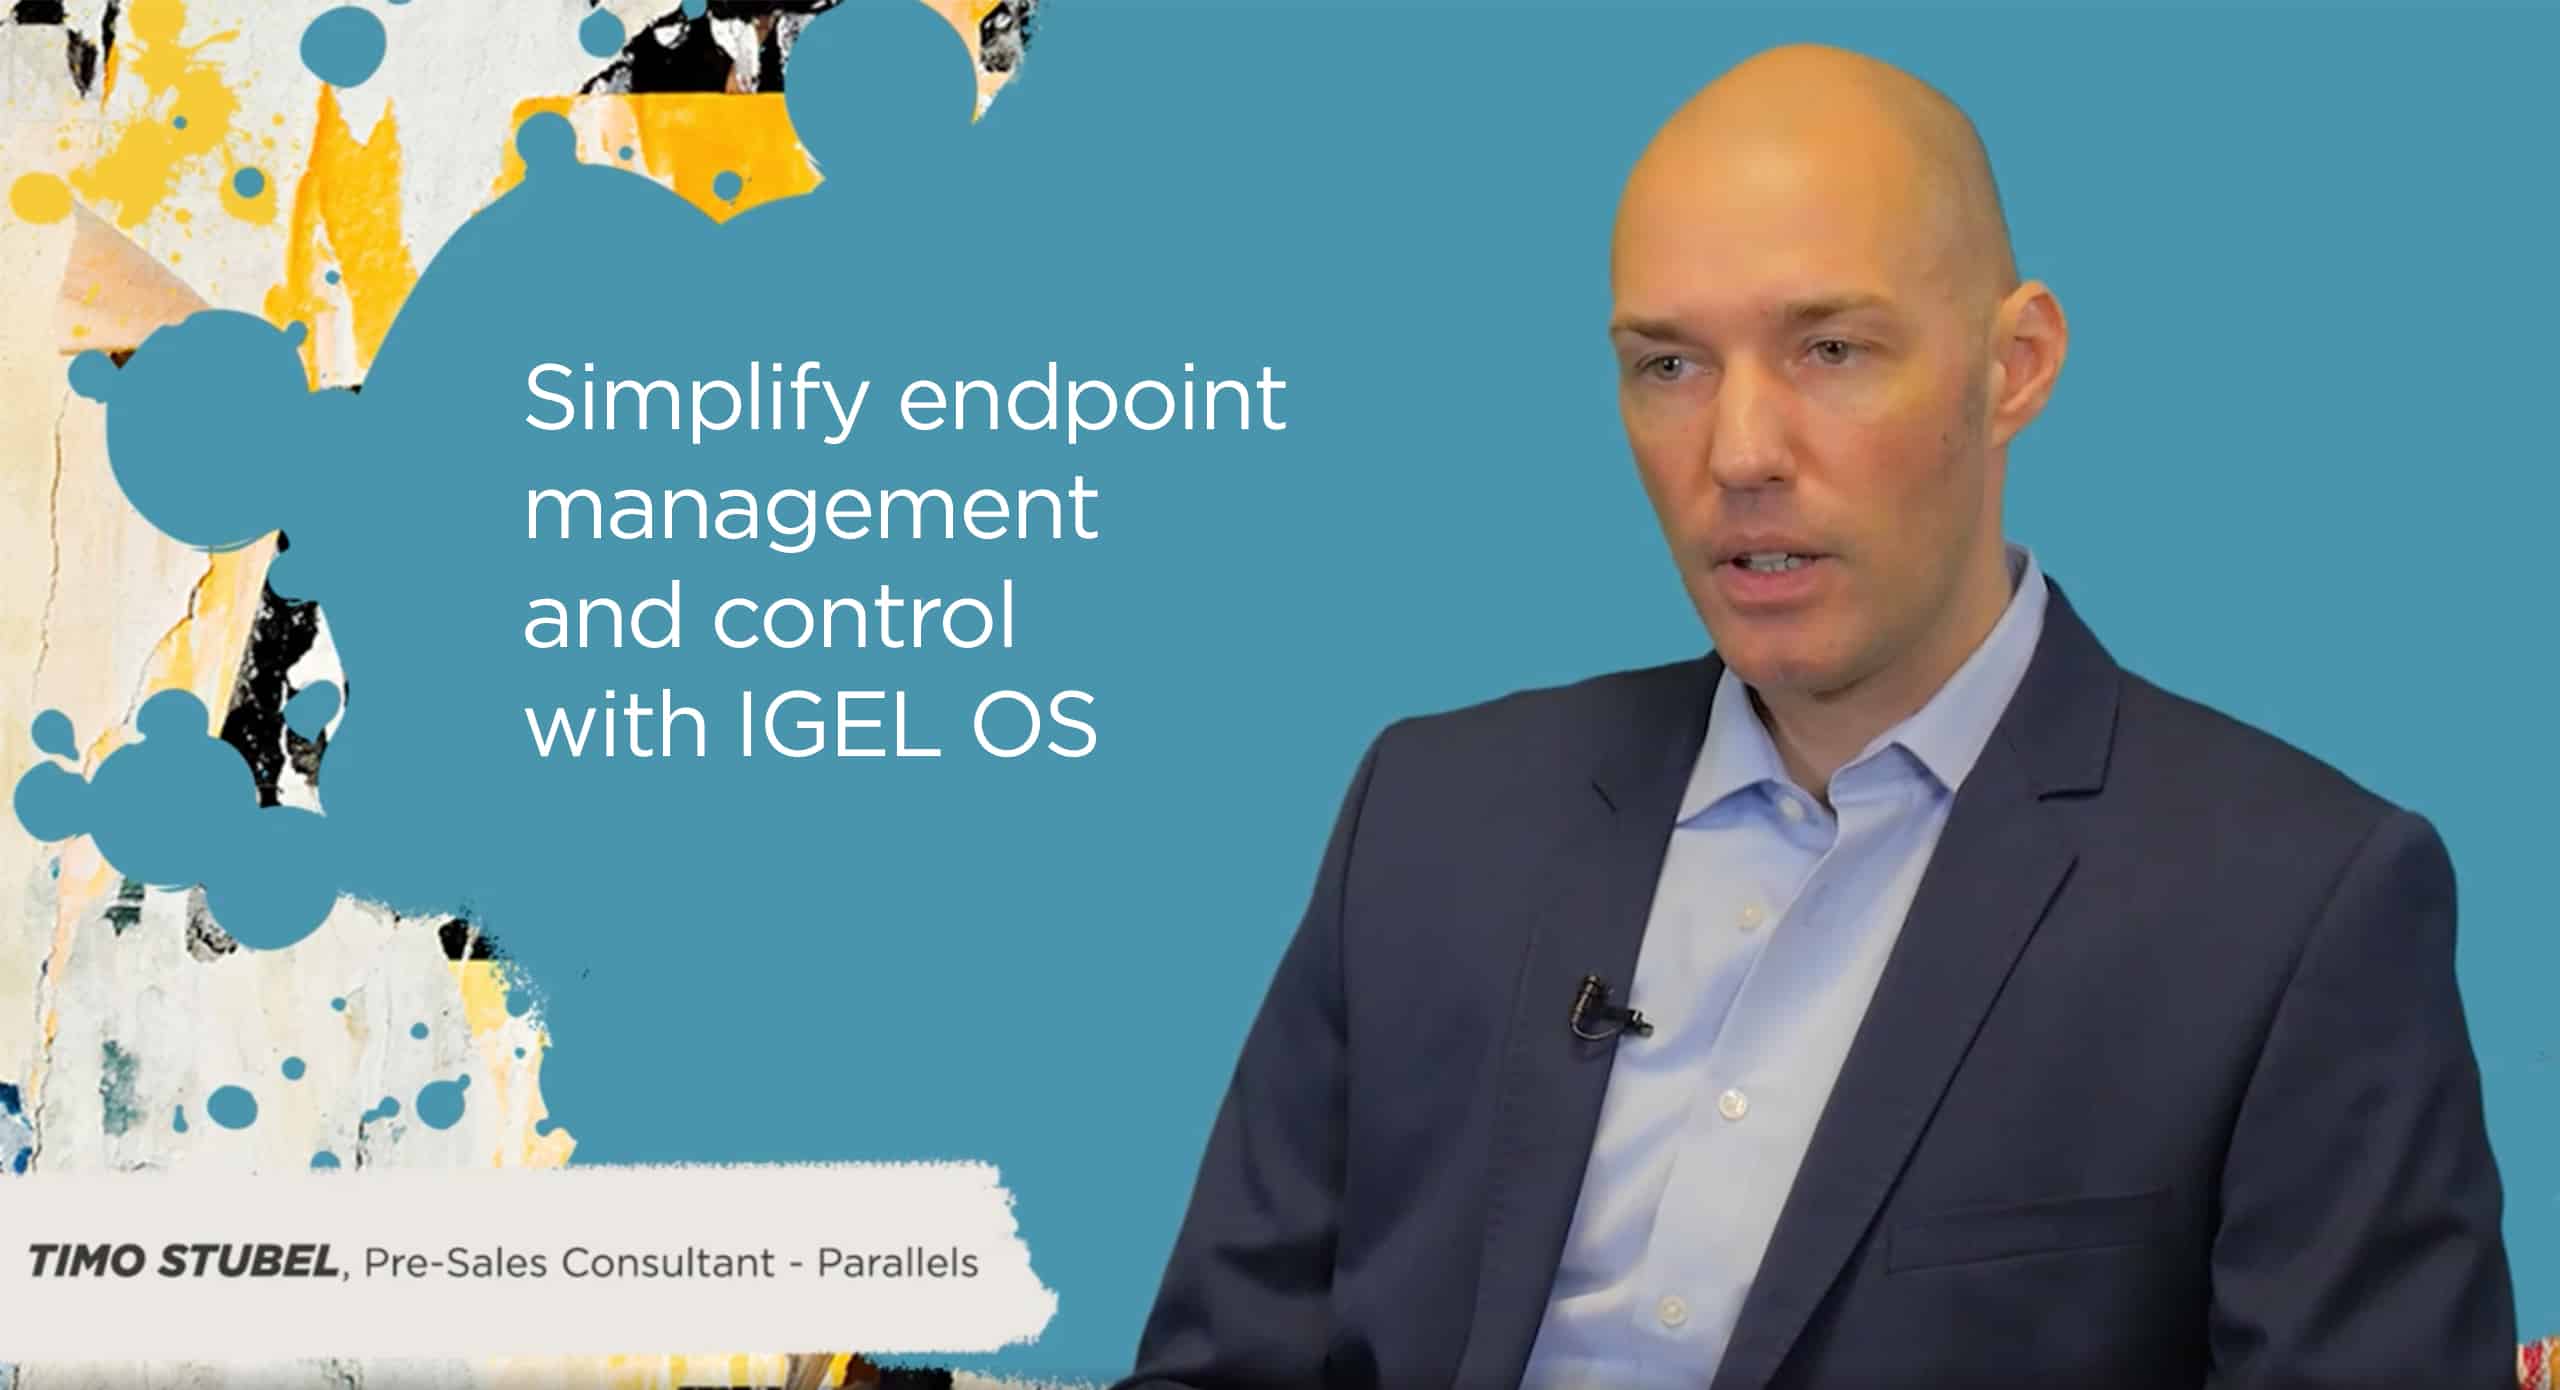 Simplify endpoint management and control with IGEL OS